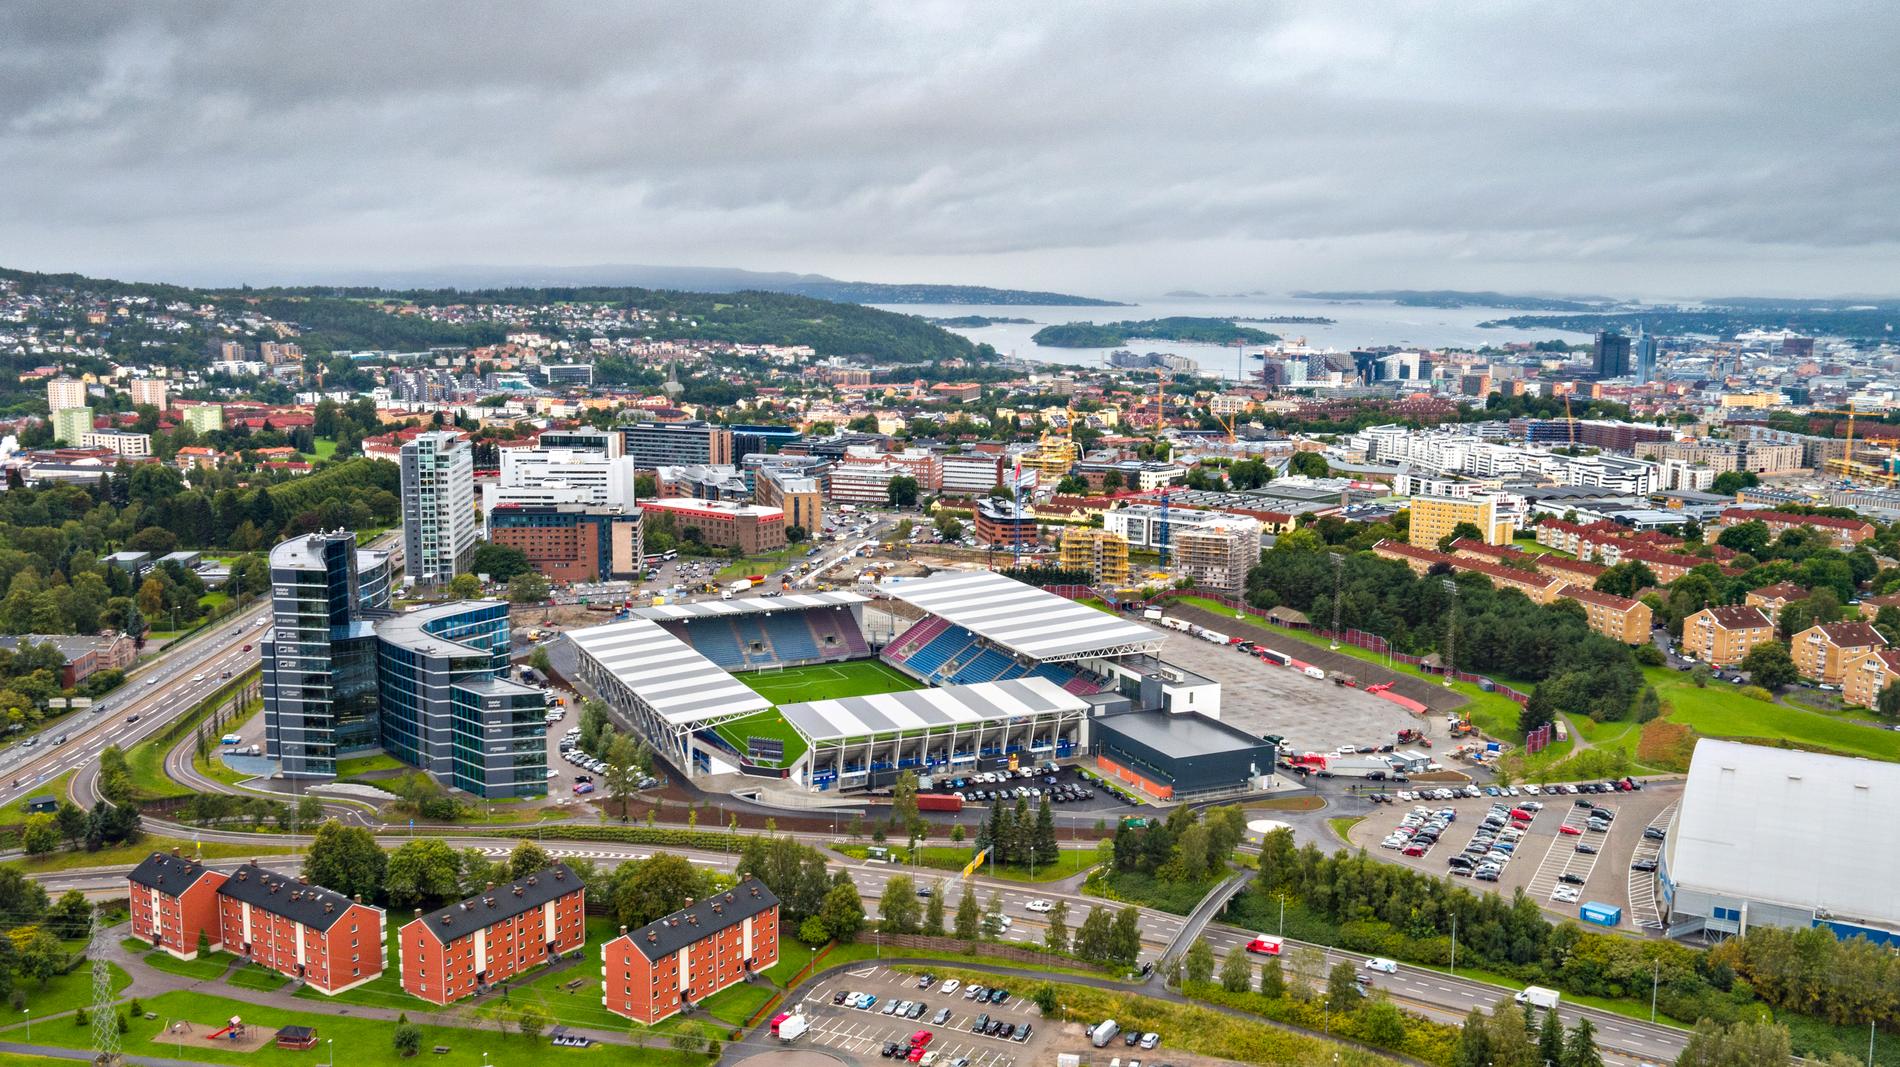 Football in Oslo is in Europe’s lowest tier after Valerenga’s relegation – Reykdal believes it is similar to the situation in Berlin